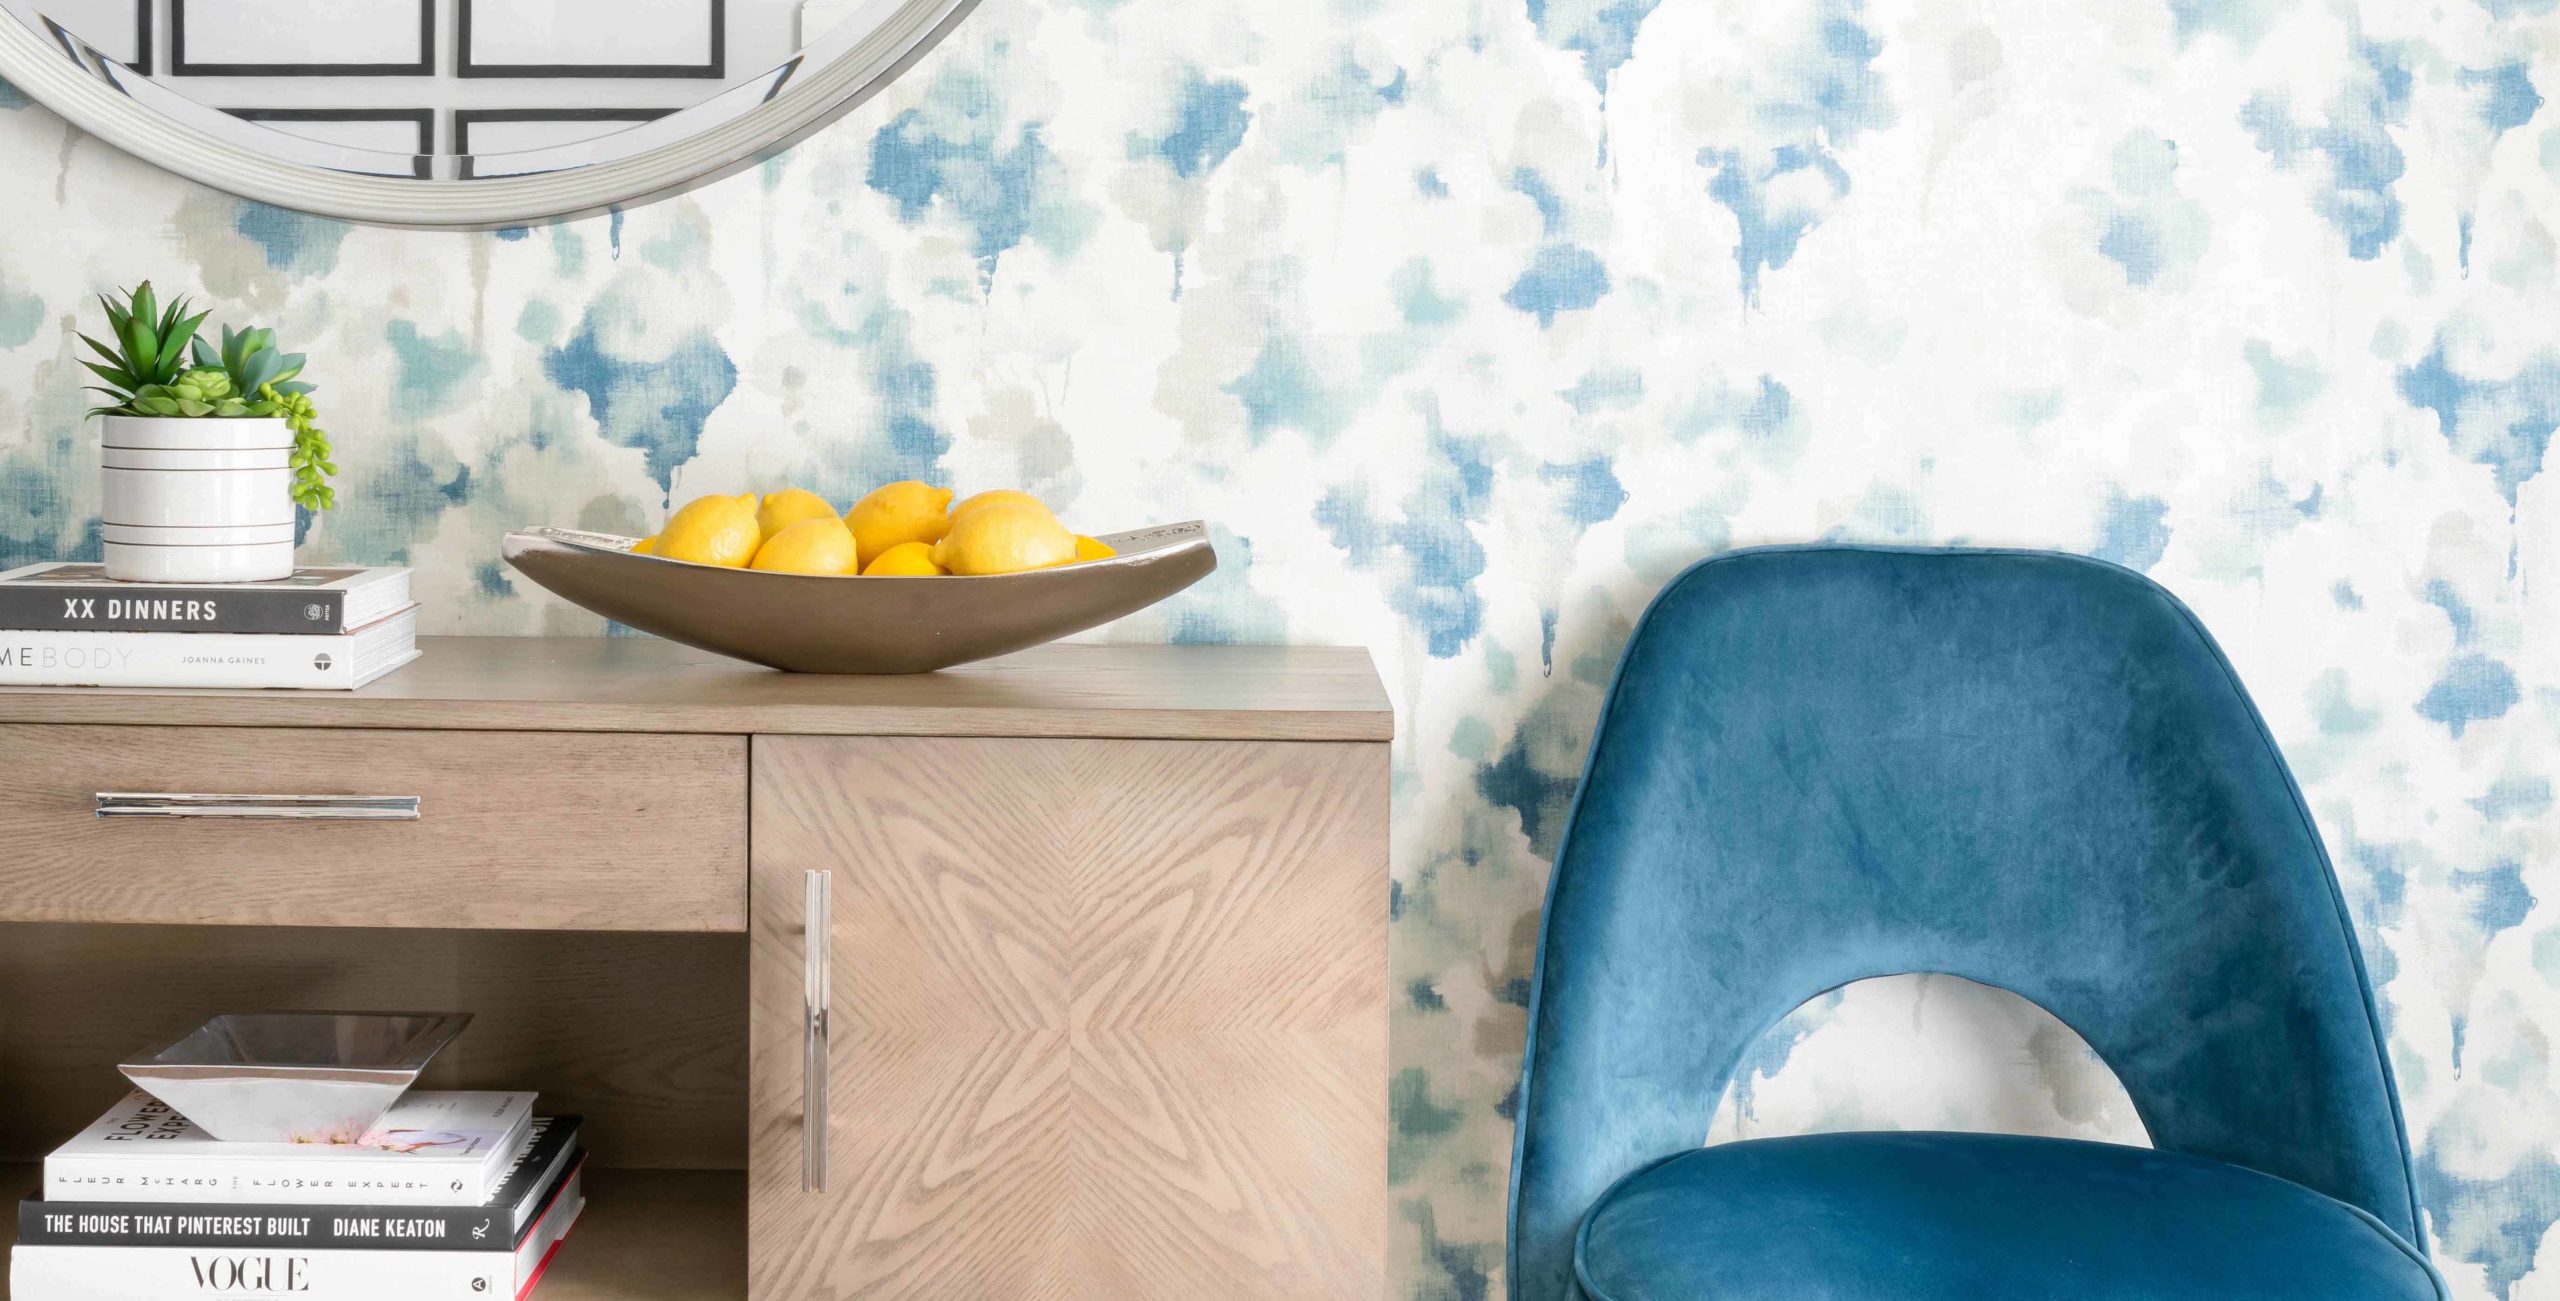 3 reasons to say “yes!” to wallpaper